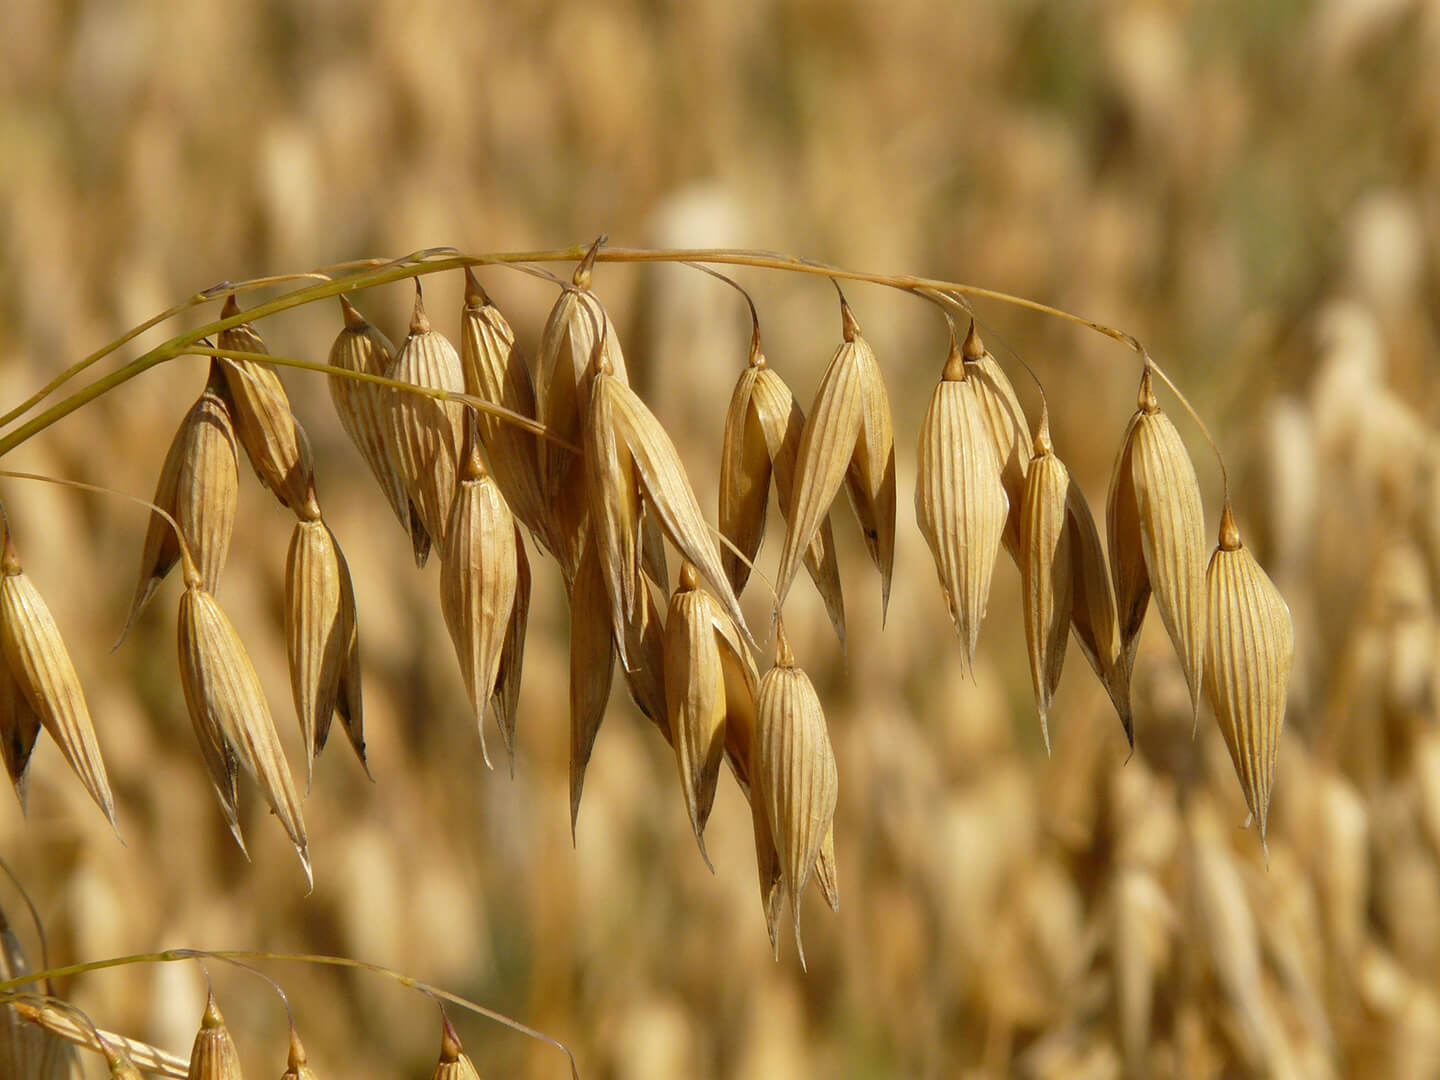 Farming, Oat Products and Agriculture